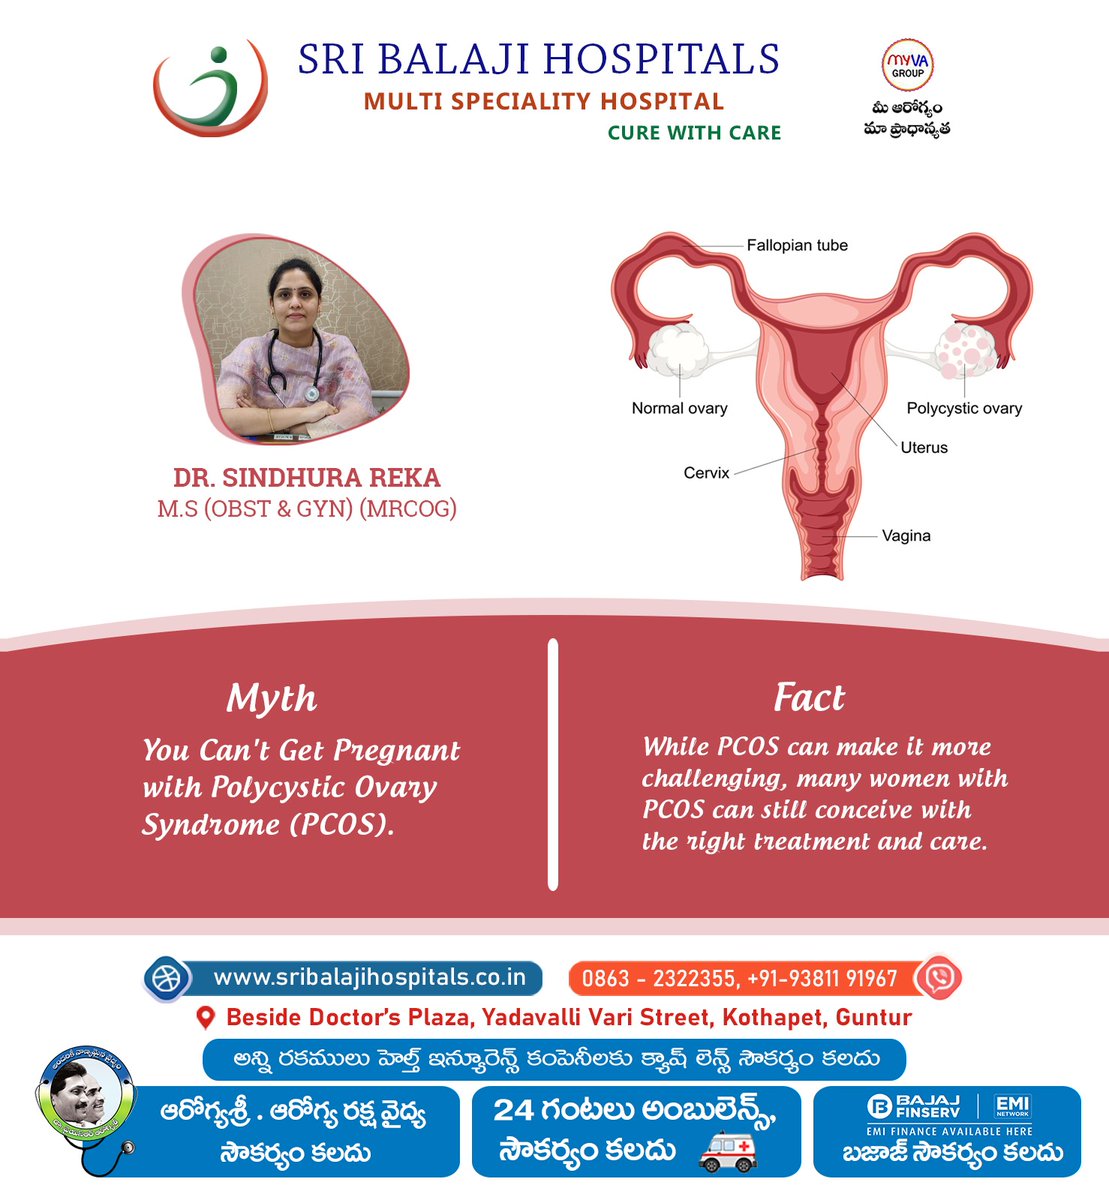 Seeking Answers About PCOS and Conception? Consult Our Gynecologist Today!

#drsindhurareka
#SriBalajiHospital
#bestgynaecologist
#PCOSAwareness
#FertilityJourney
#PCOSMythBusted
#ConceivingWithPCOS
#GynecologistConsultation
#WomensHealth
#PCOSCommunity
#PCOSFacts